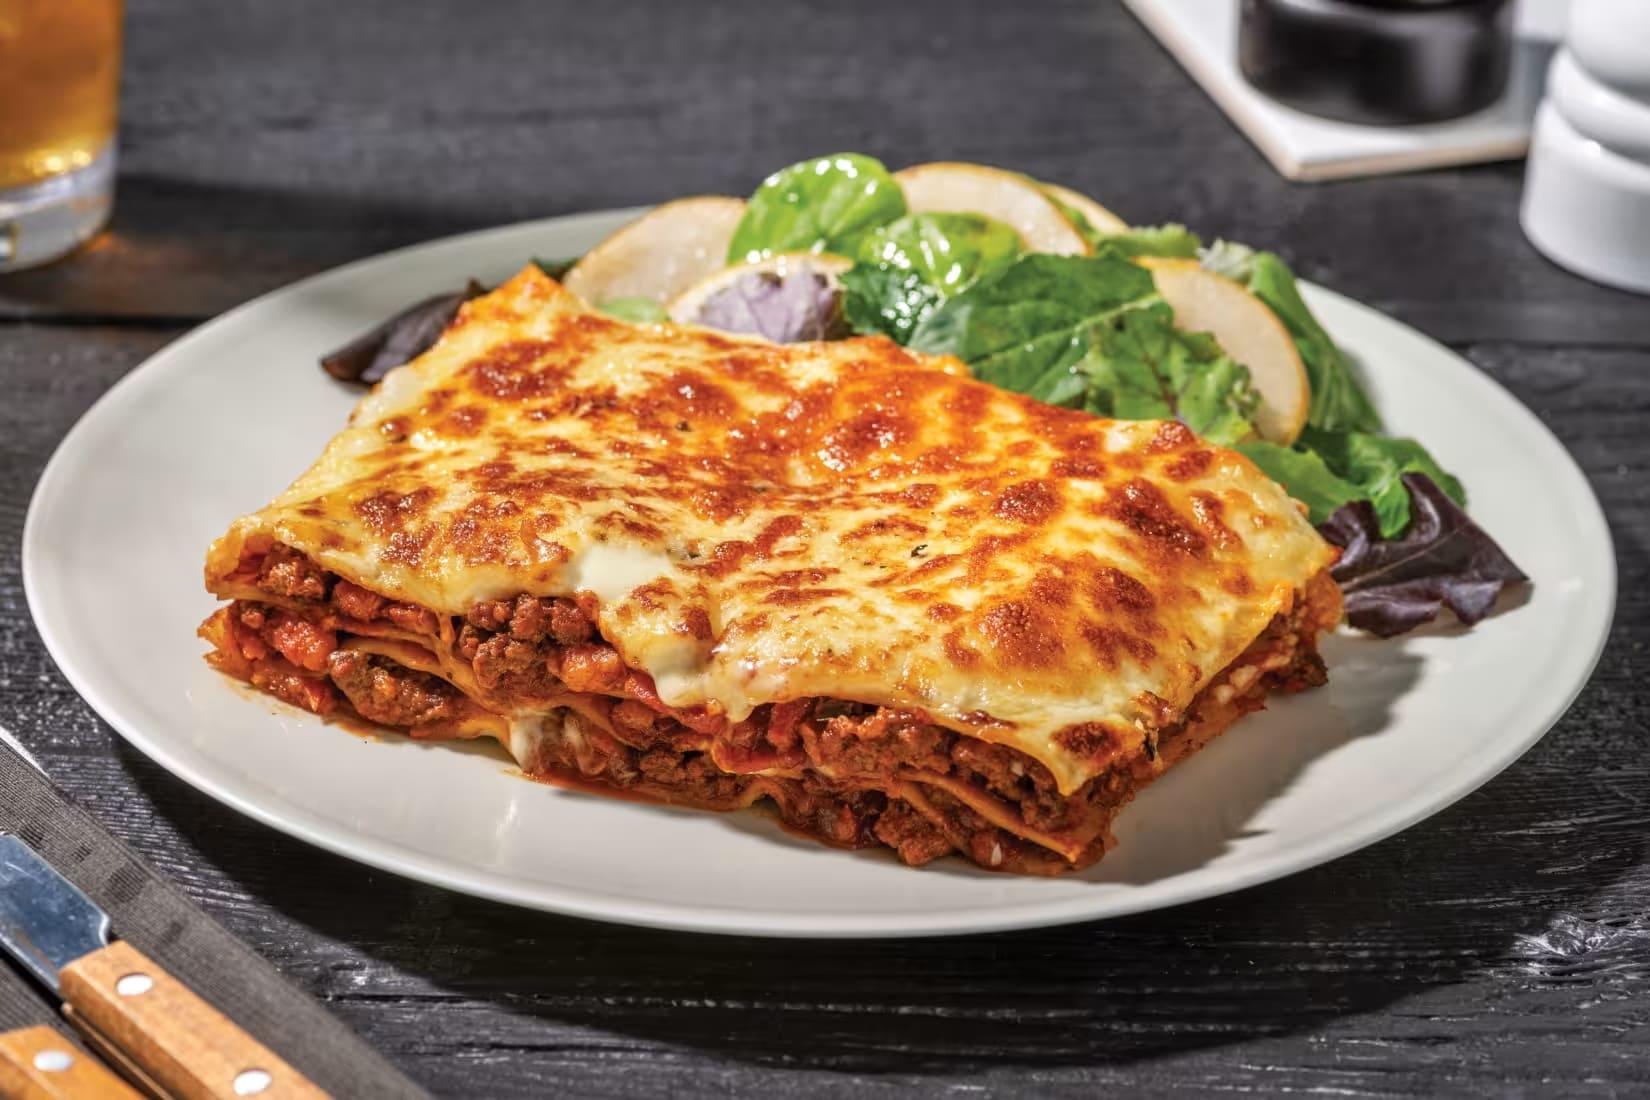 What Ingredients Do You Need for the Best Lasagna?